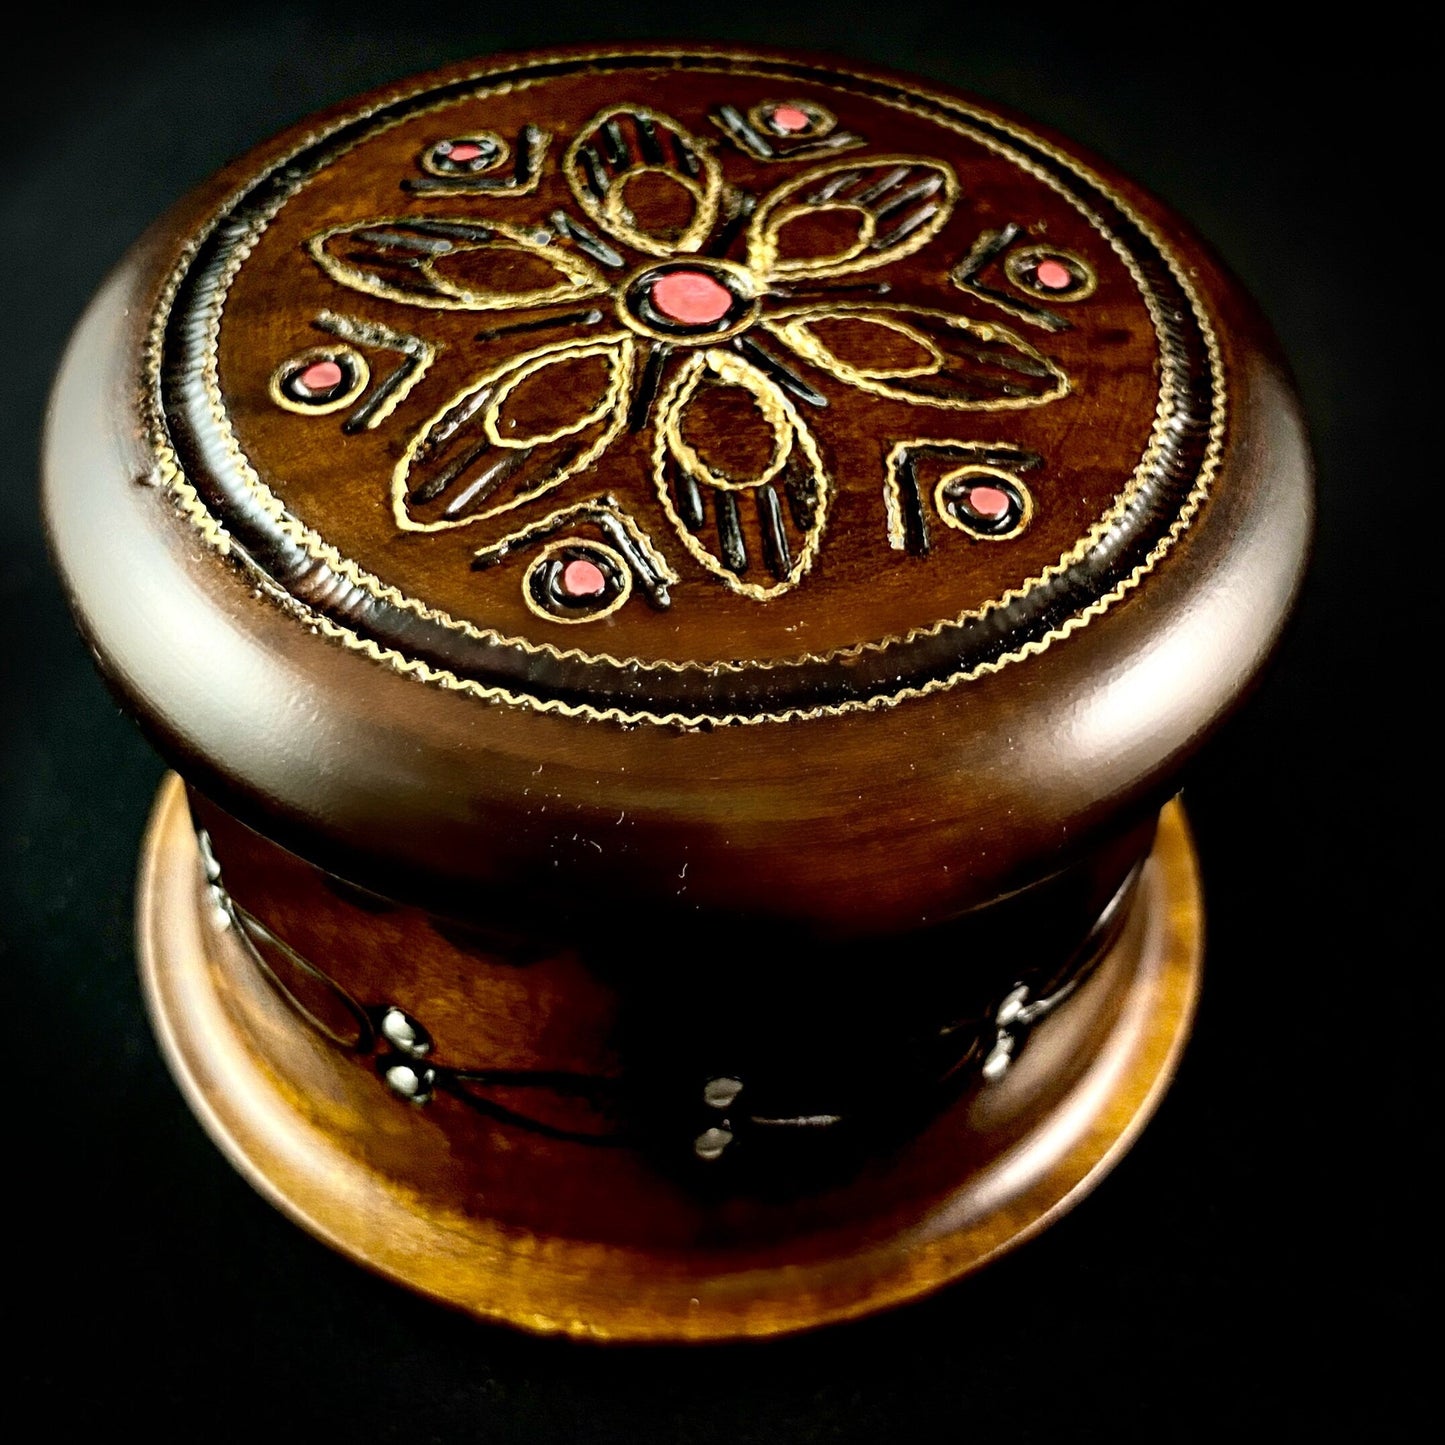 Round Floral Patterned Jewelry Box, Handmade Wooden Treasure Box